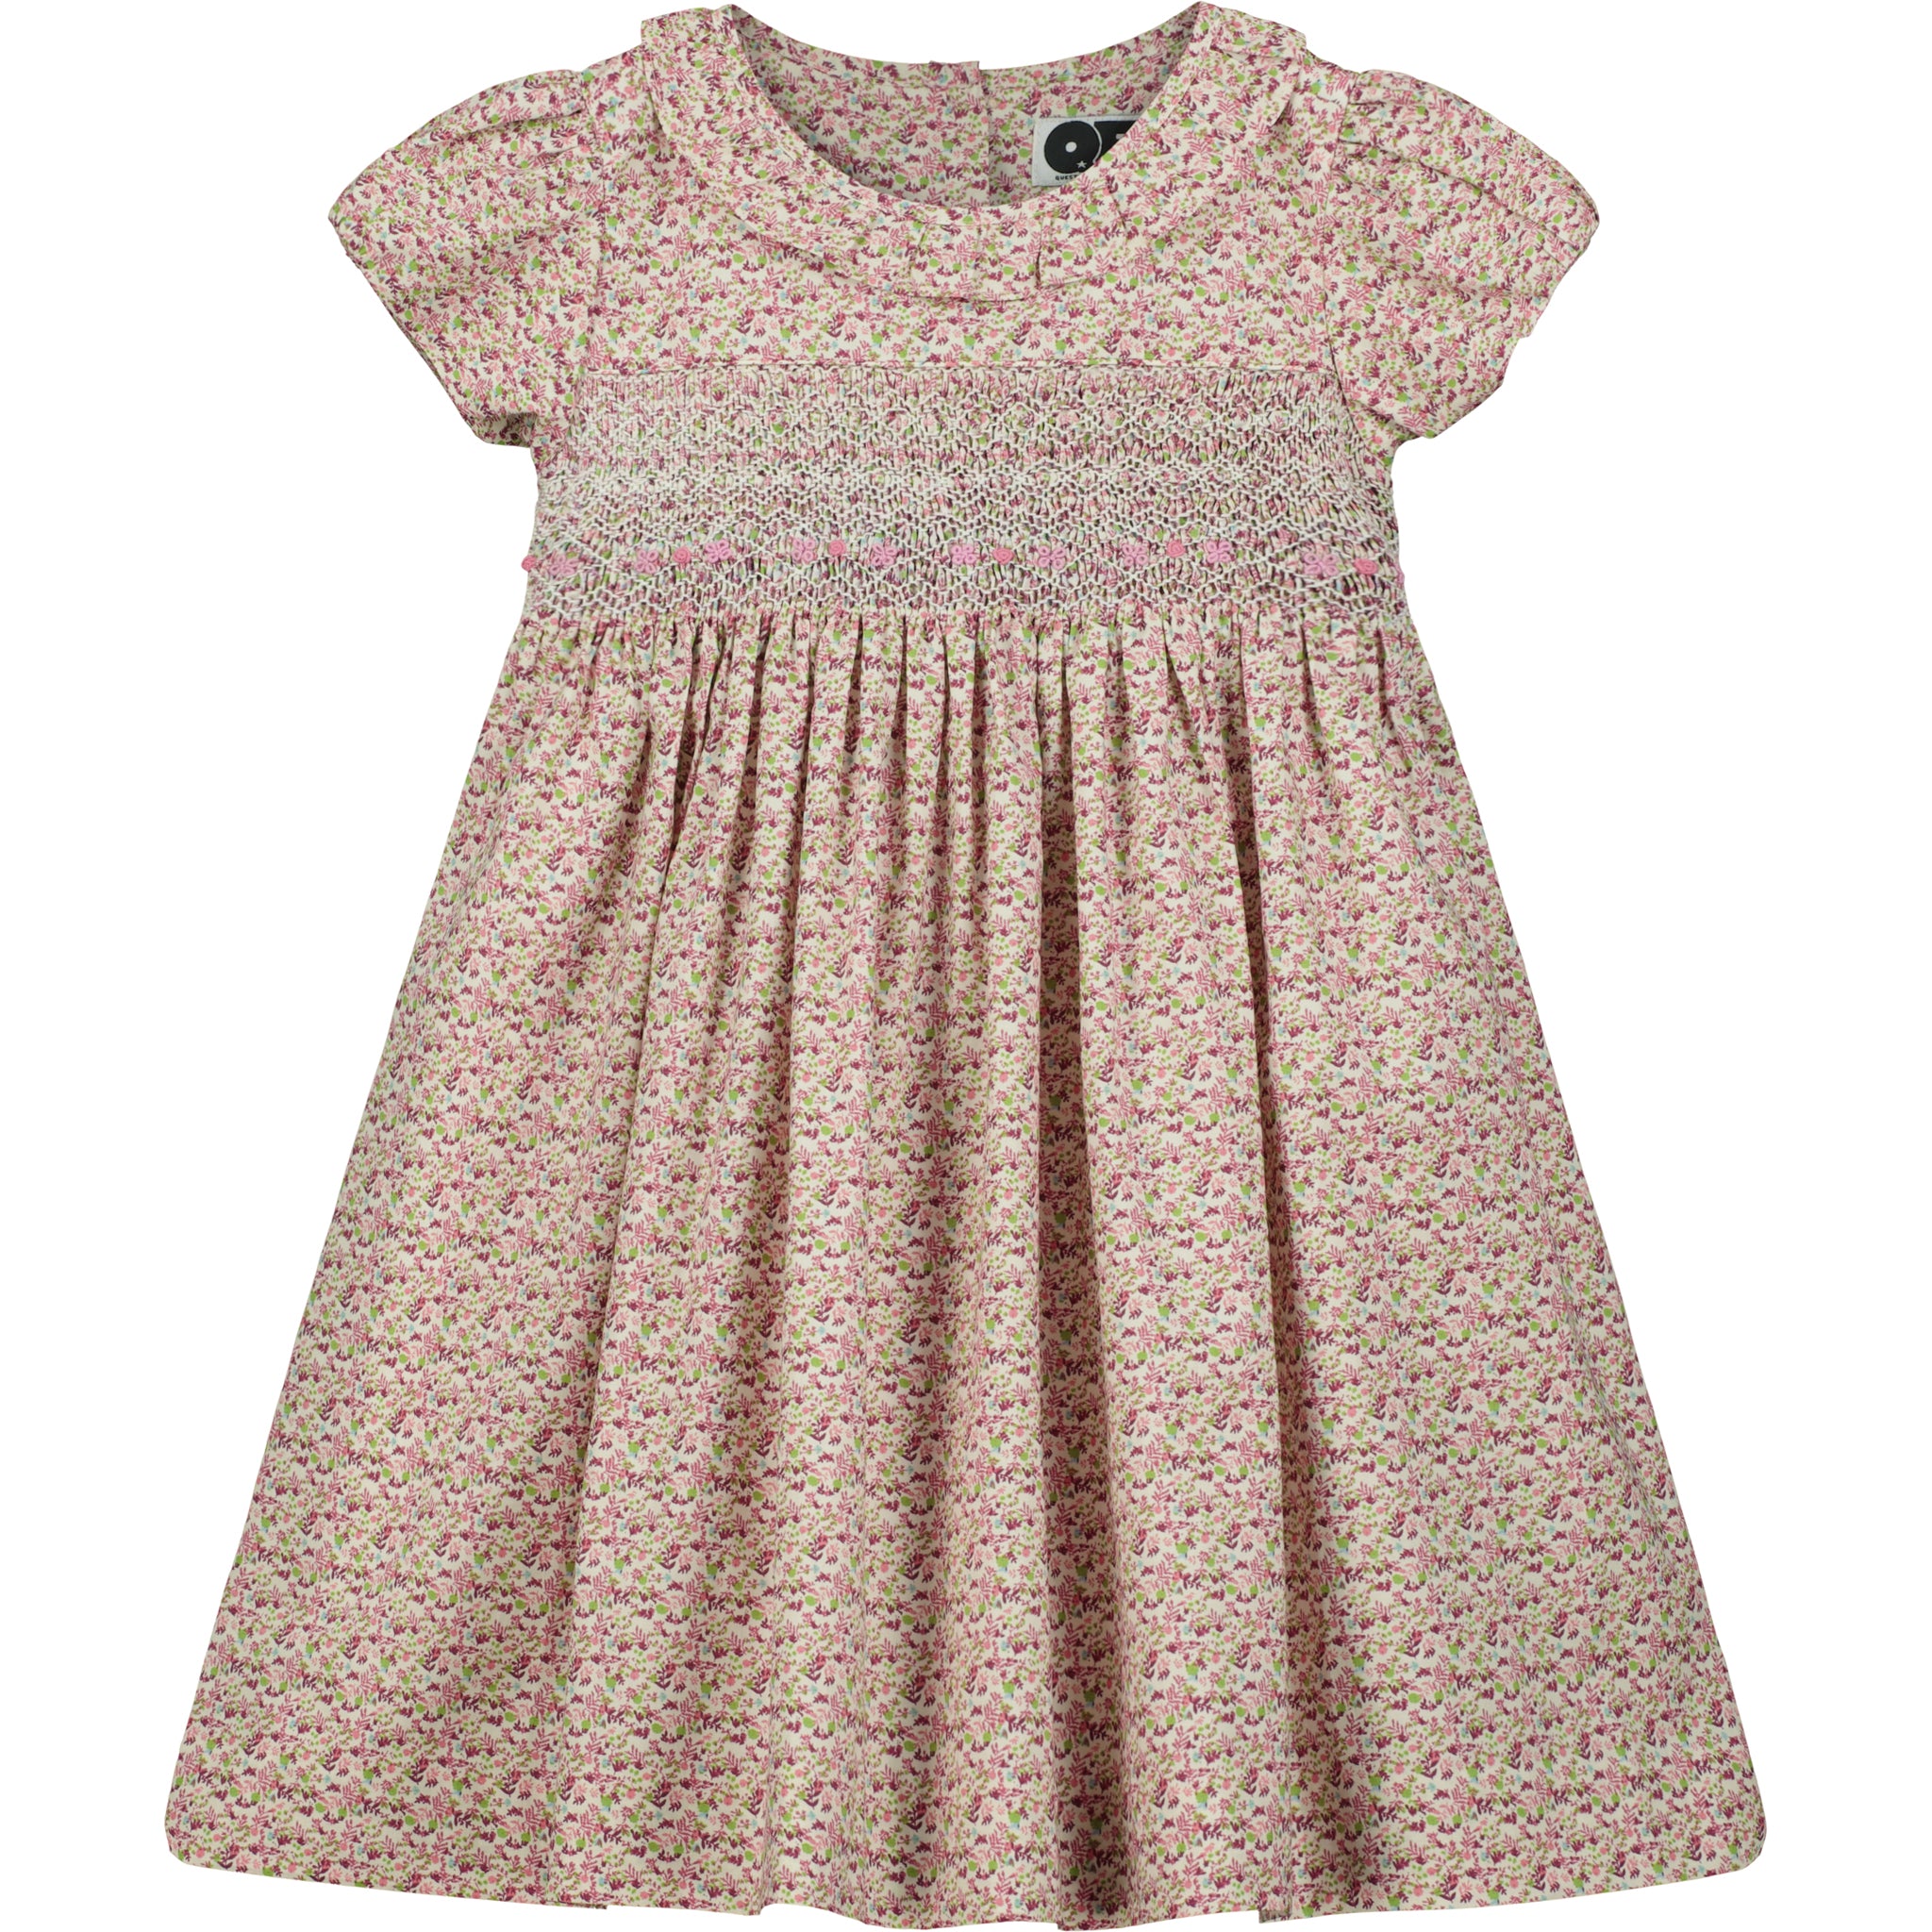 ditzy floral smock dress, featuring a frill collar and puff sleeves